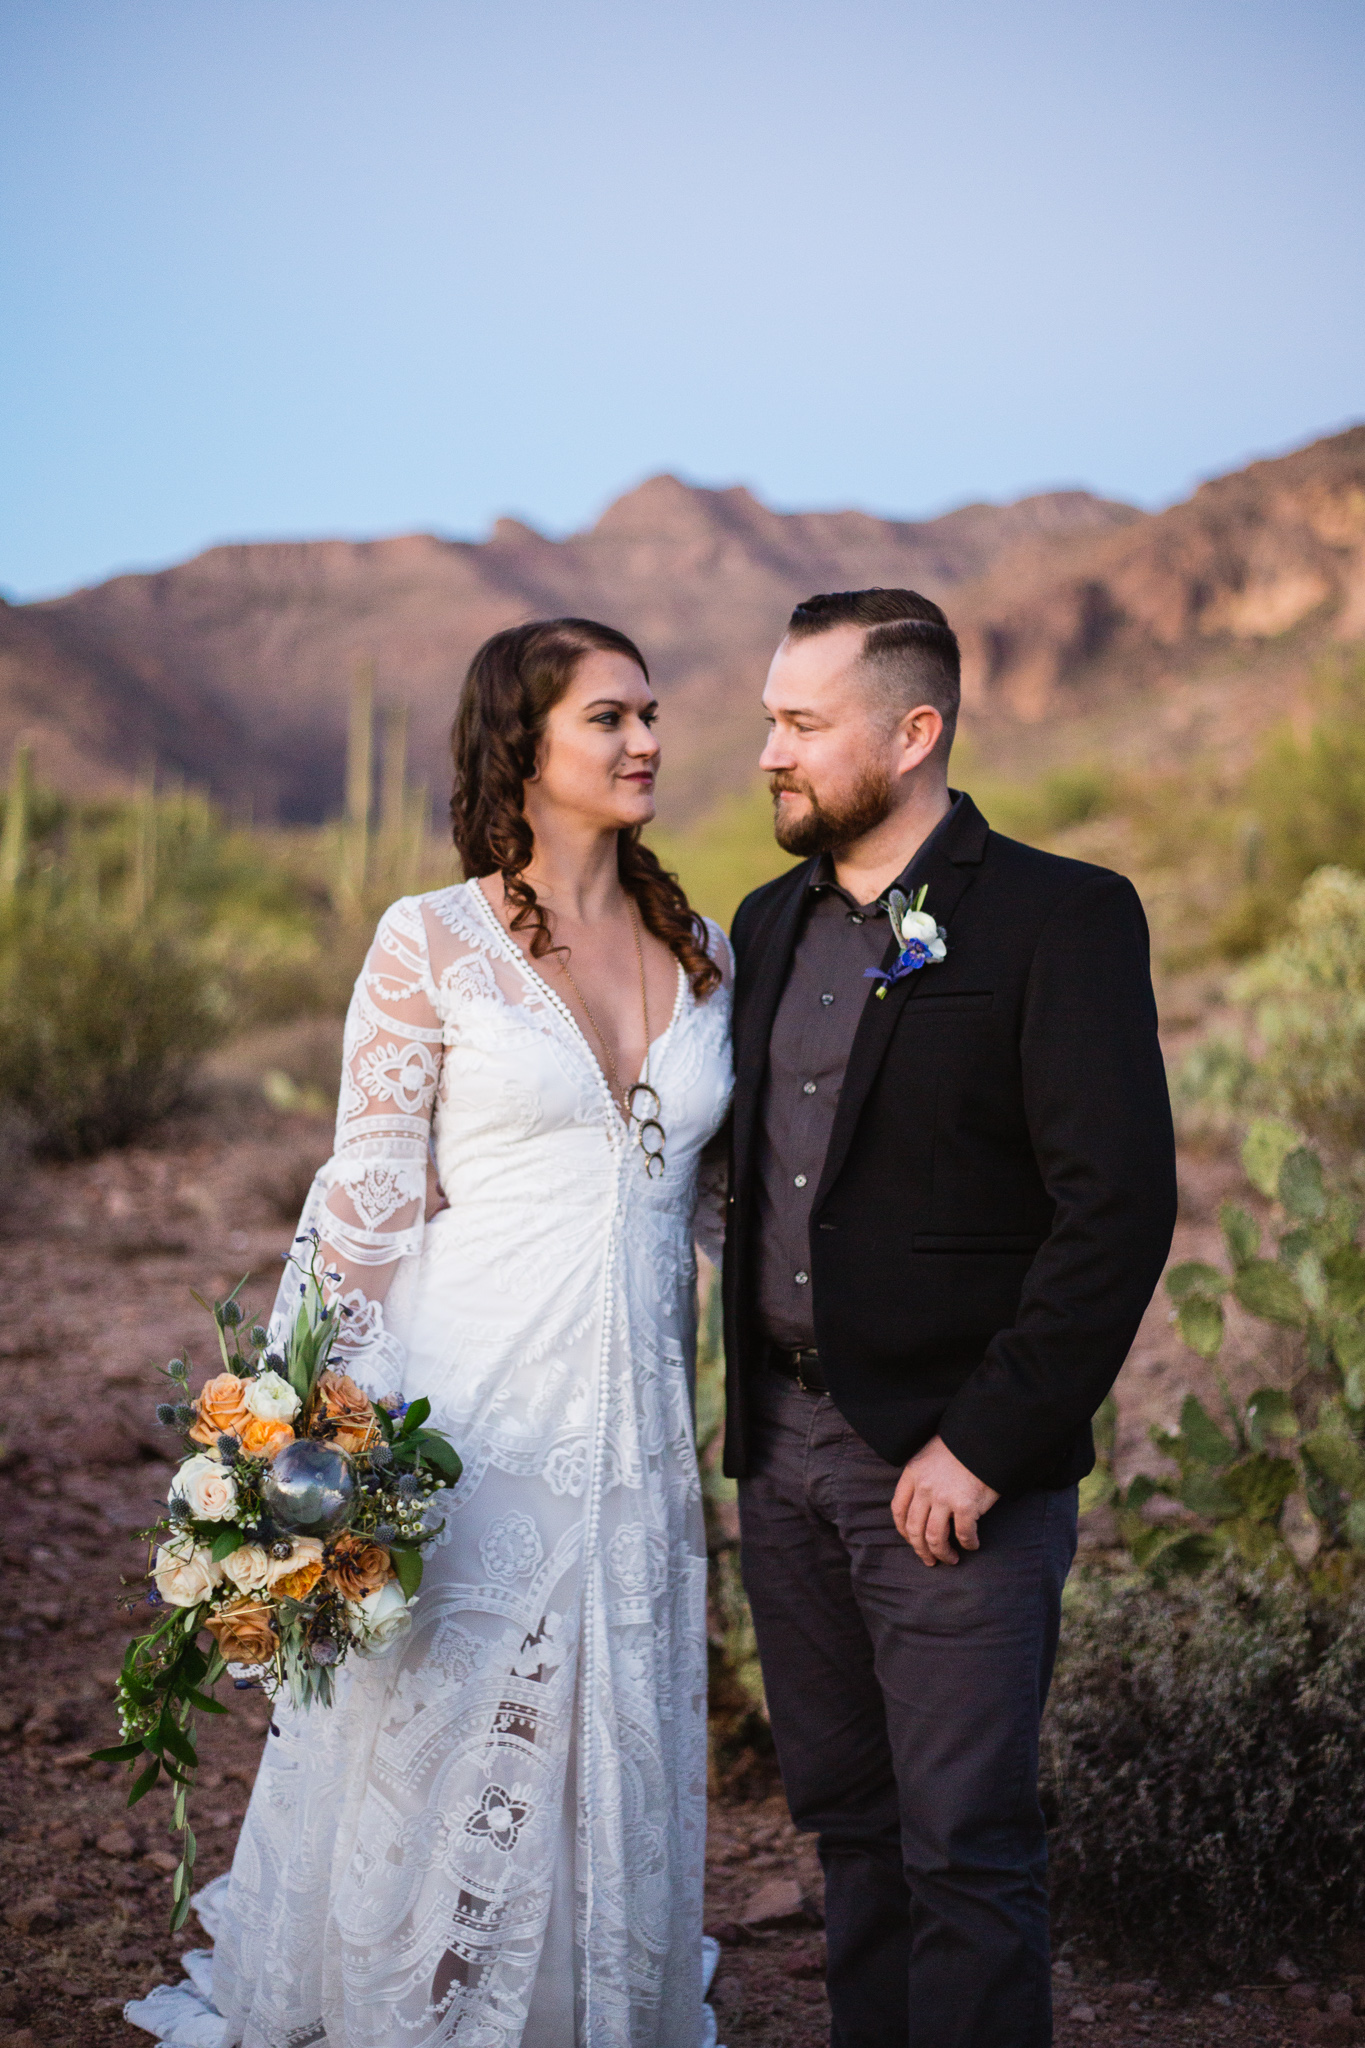 Witchy bohemian black white and gold inspired bride and groom at a Superstition Mountains styled wedding surrounded by the beauty of the desert.